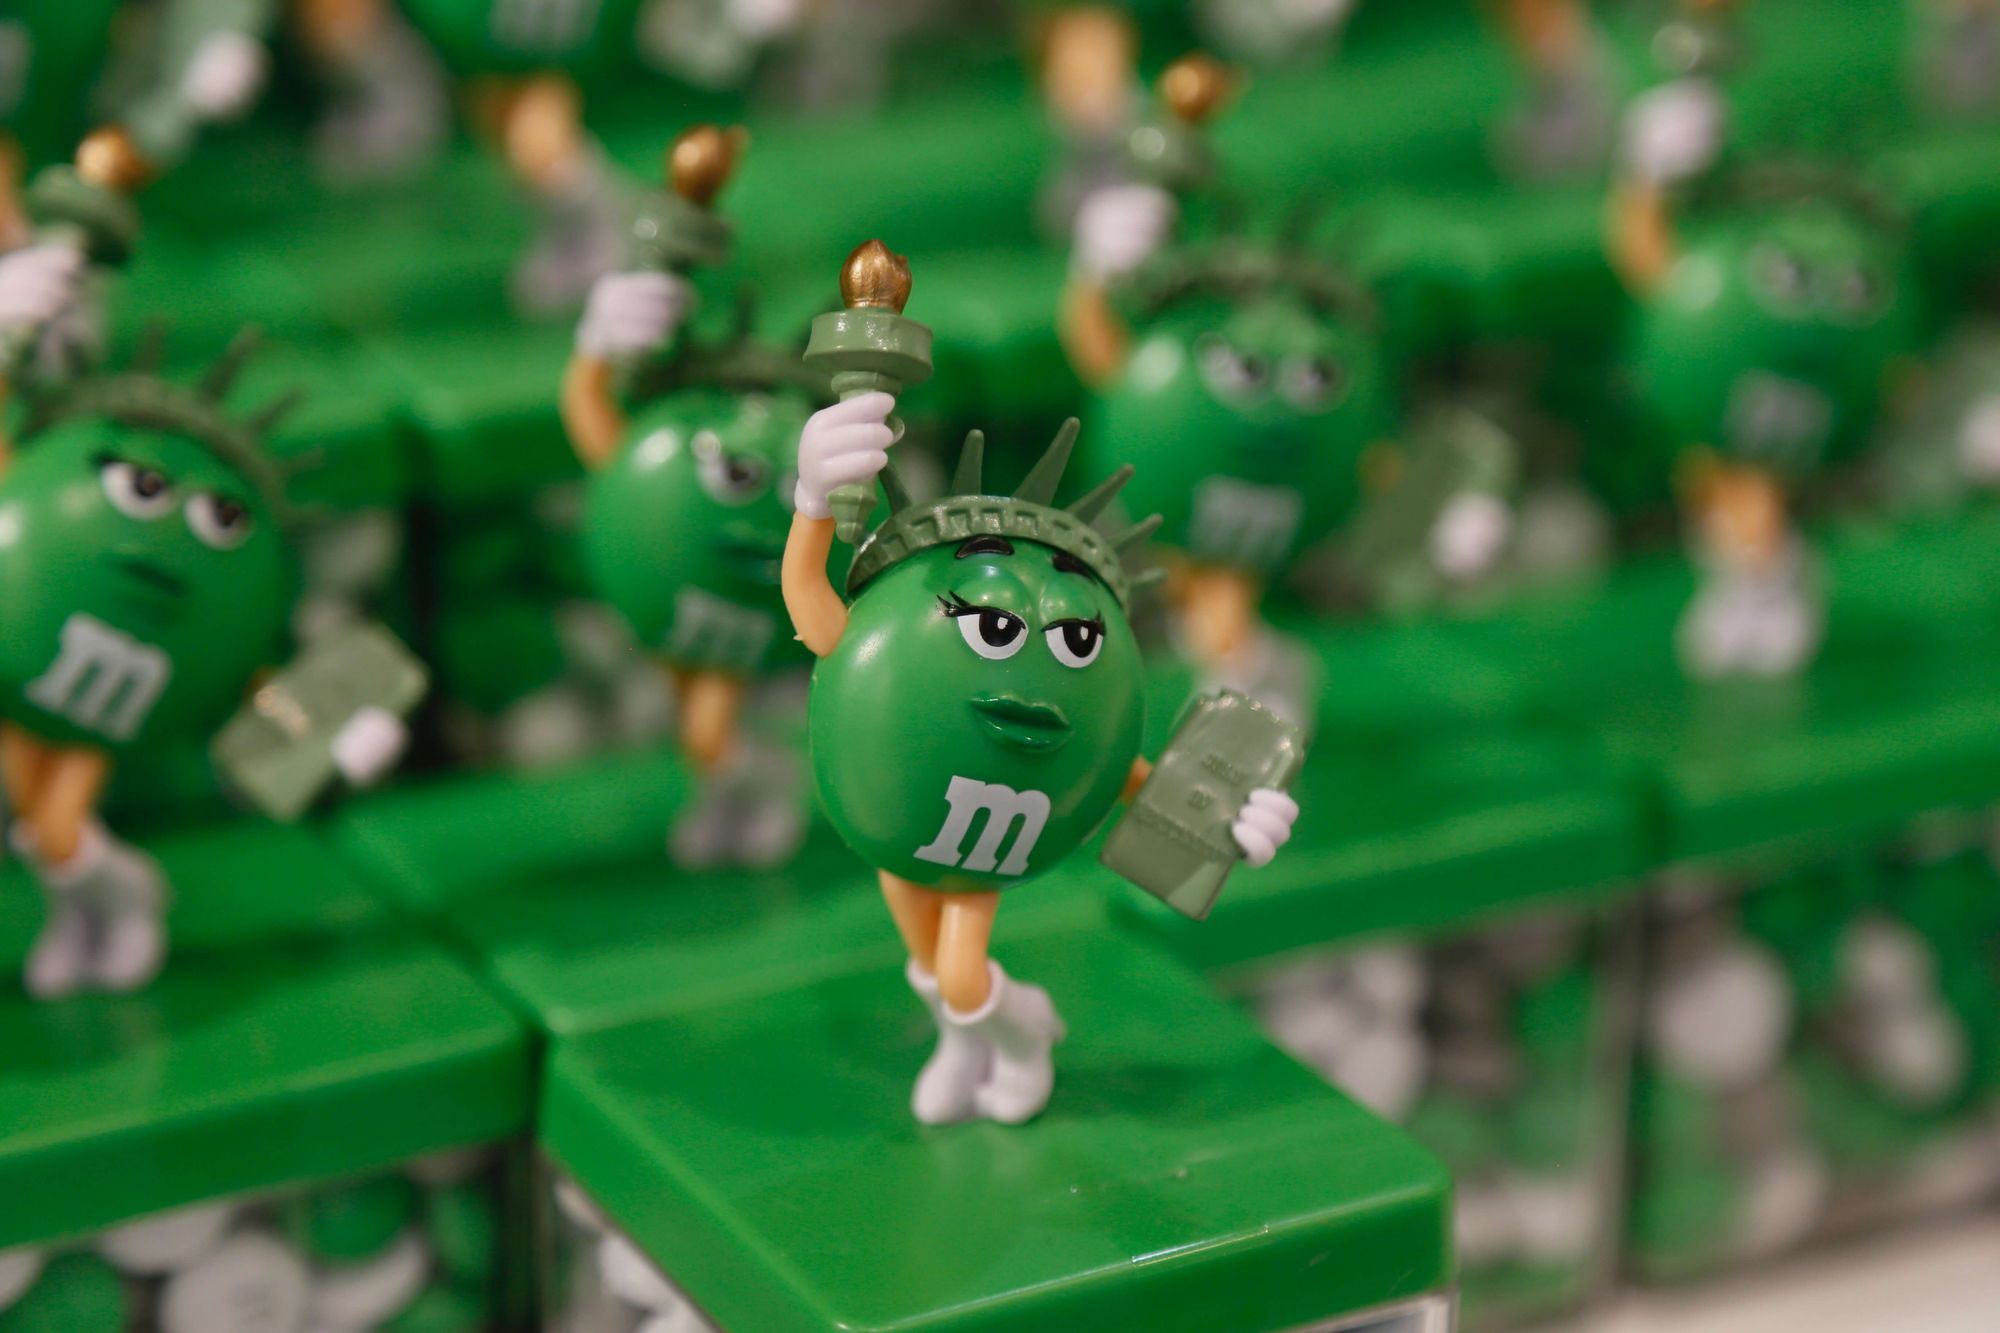 Celebrate the Festive Season with Delicious Christmas M&M's!